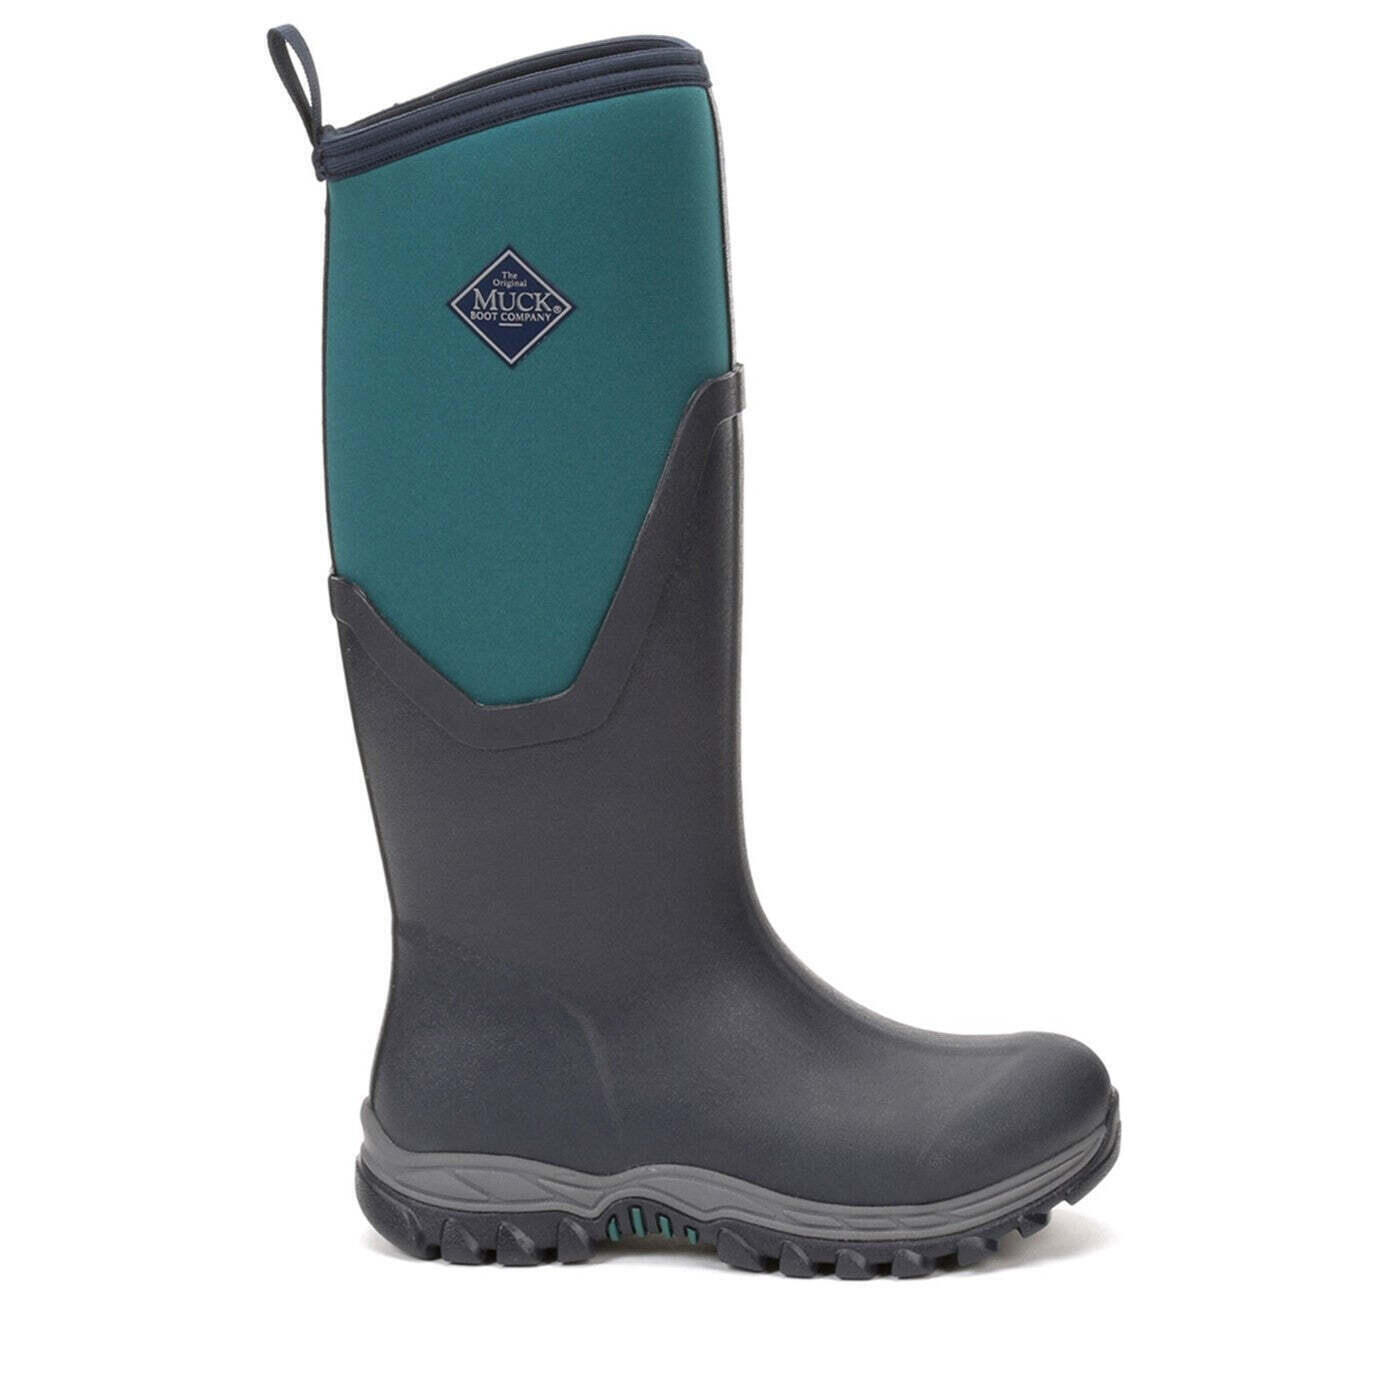 Womens/Ladies Arctic Sport Tall Pill On Wellie Boots (Navy/Spruce) 4/4